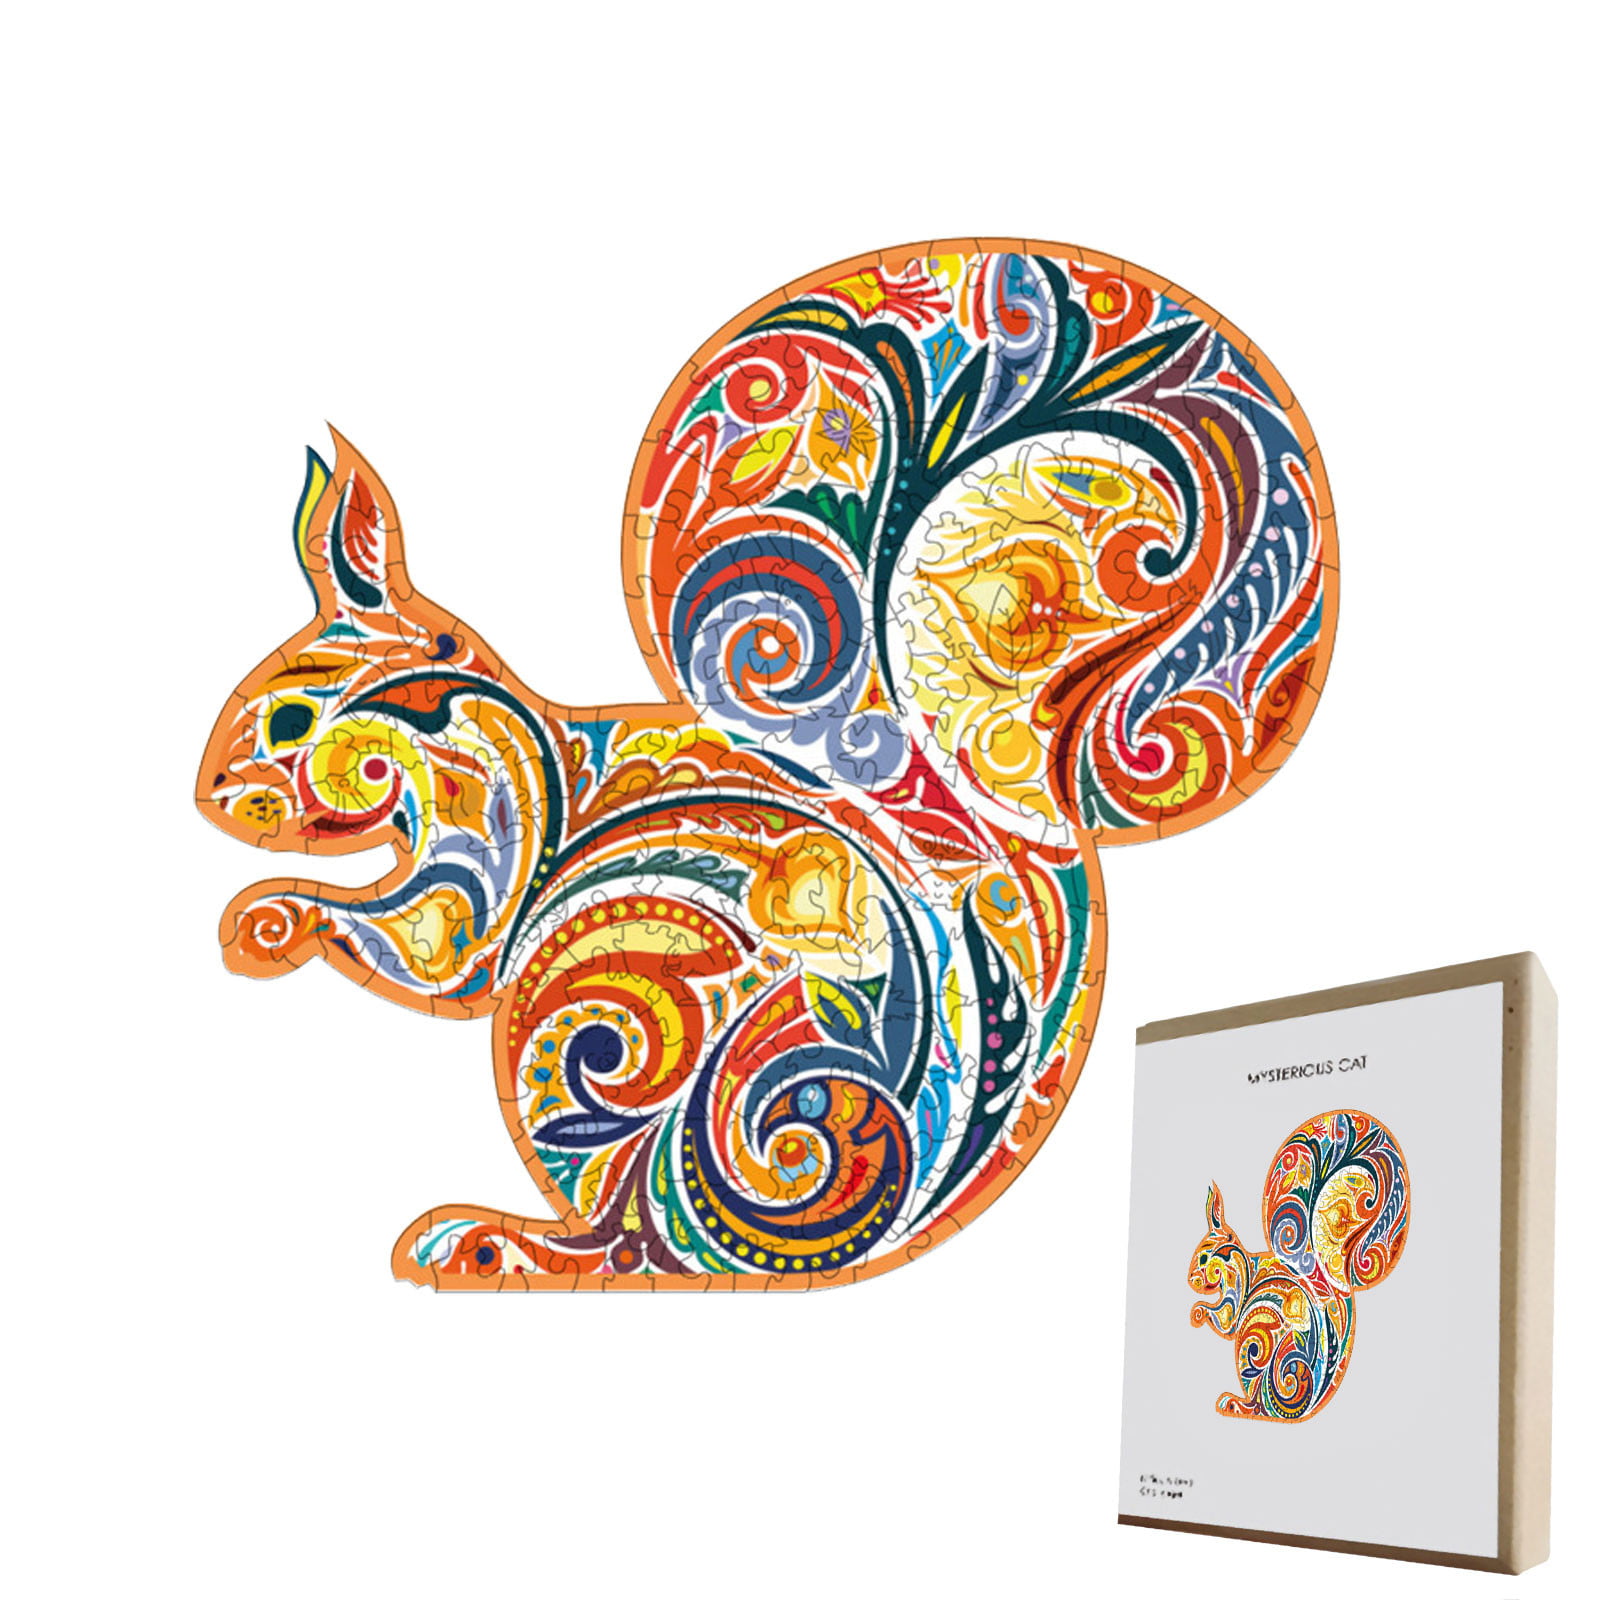 Wooden Animals Shaped Puzzles Wooden Jigsaw Puzzles for Adults and Kids Family Game Play Collection Squirrel Jigsaw Puzzles Set